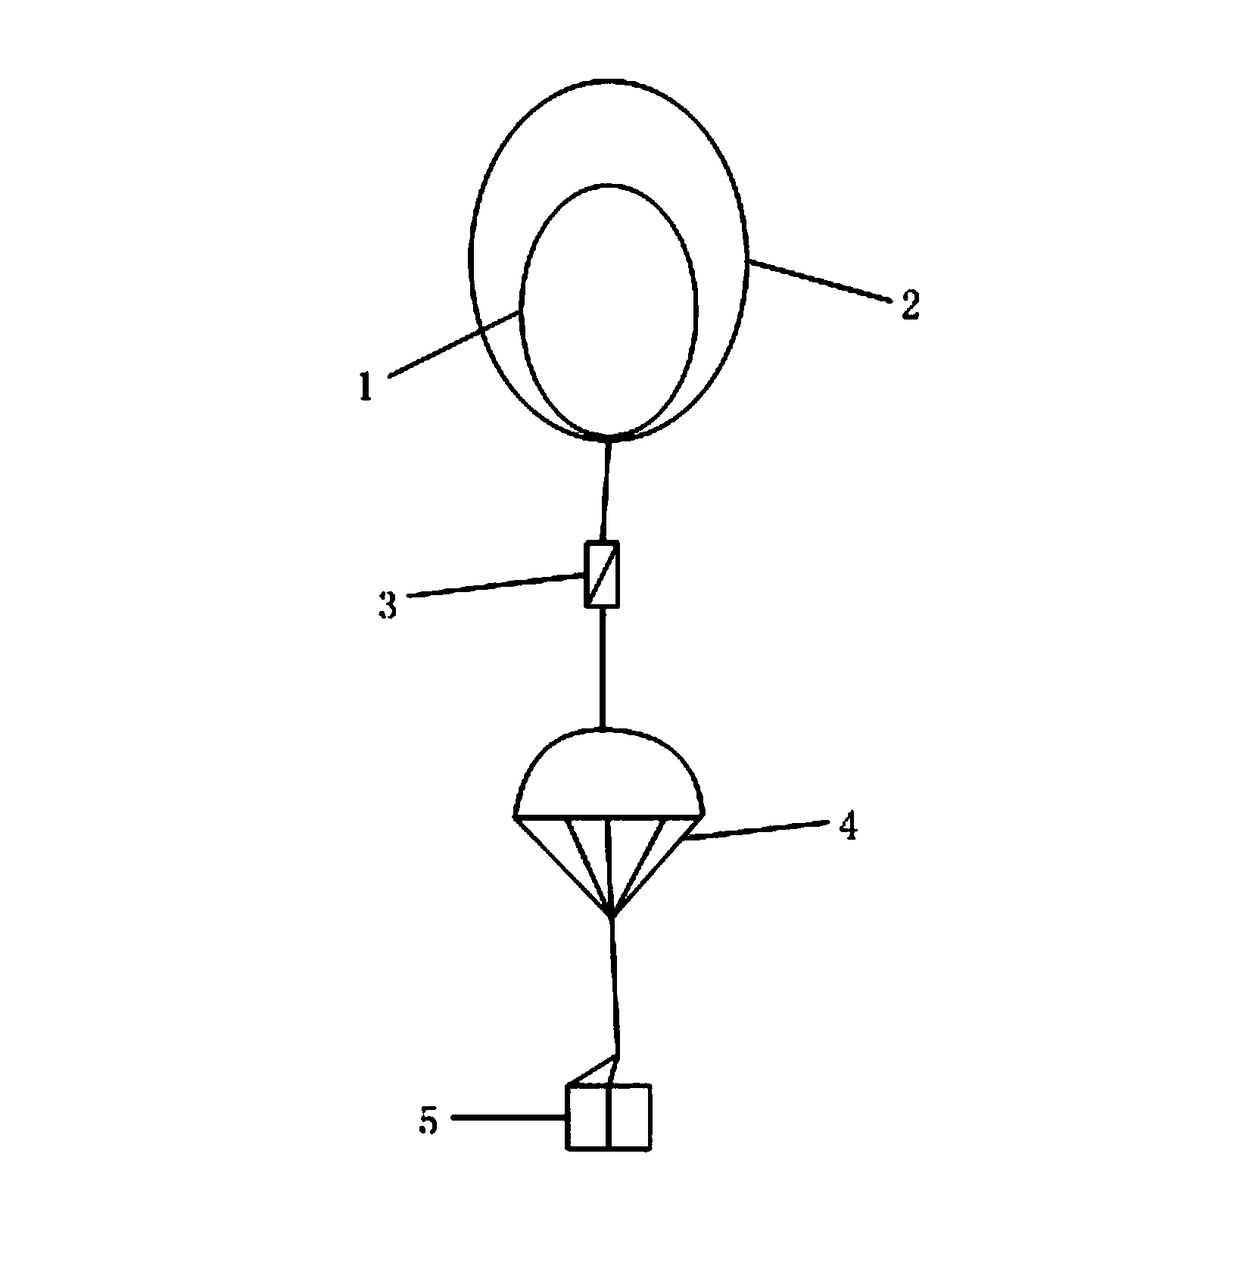 Weather balloon with constant ball residual volume after blasting and application thereof